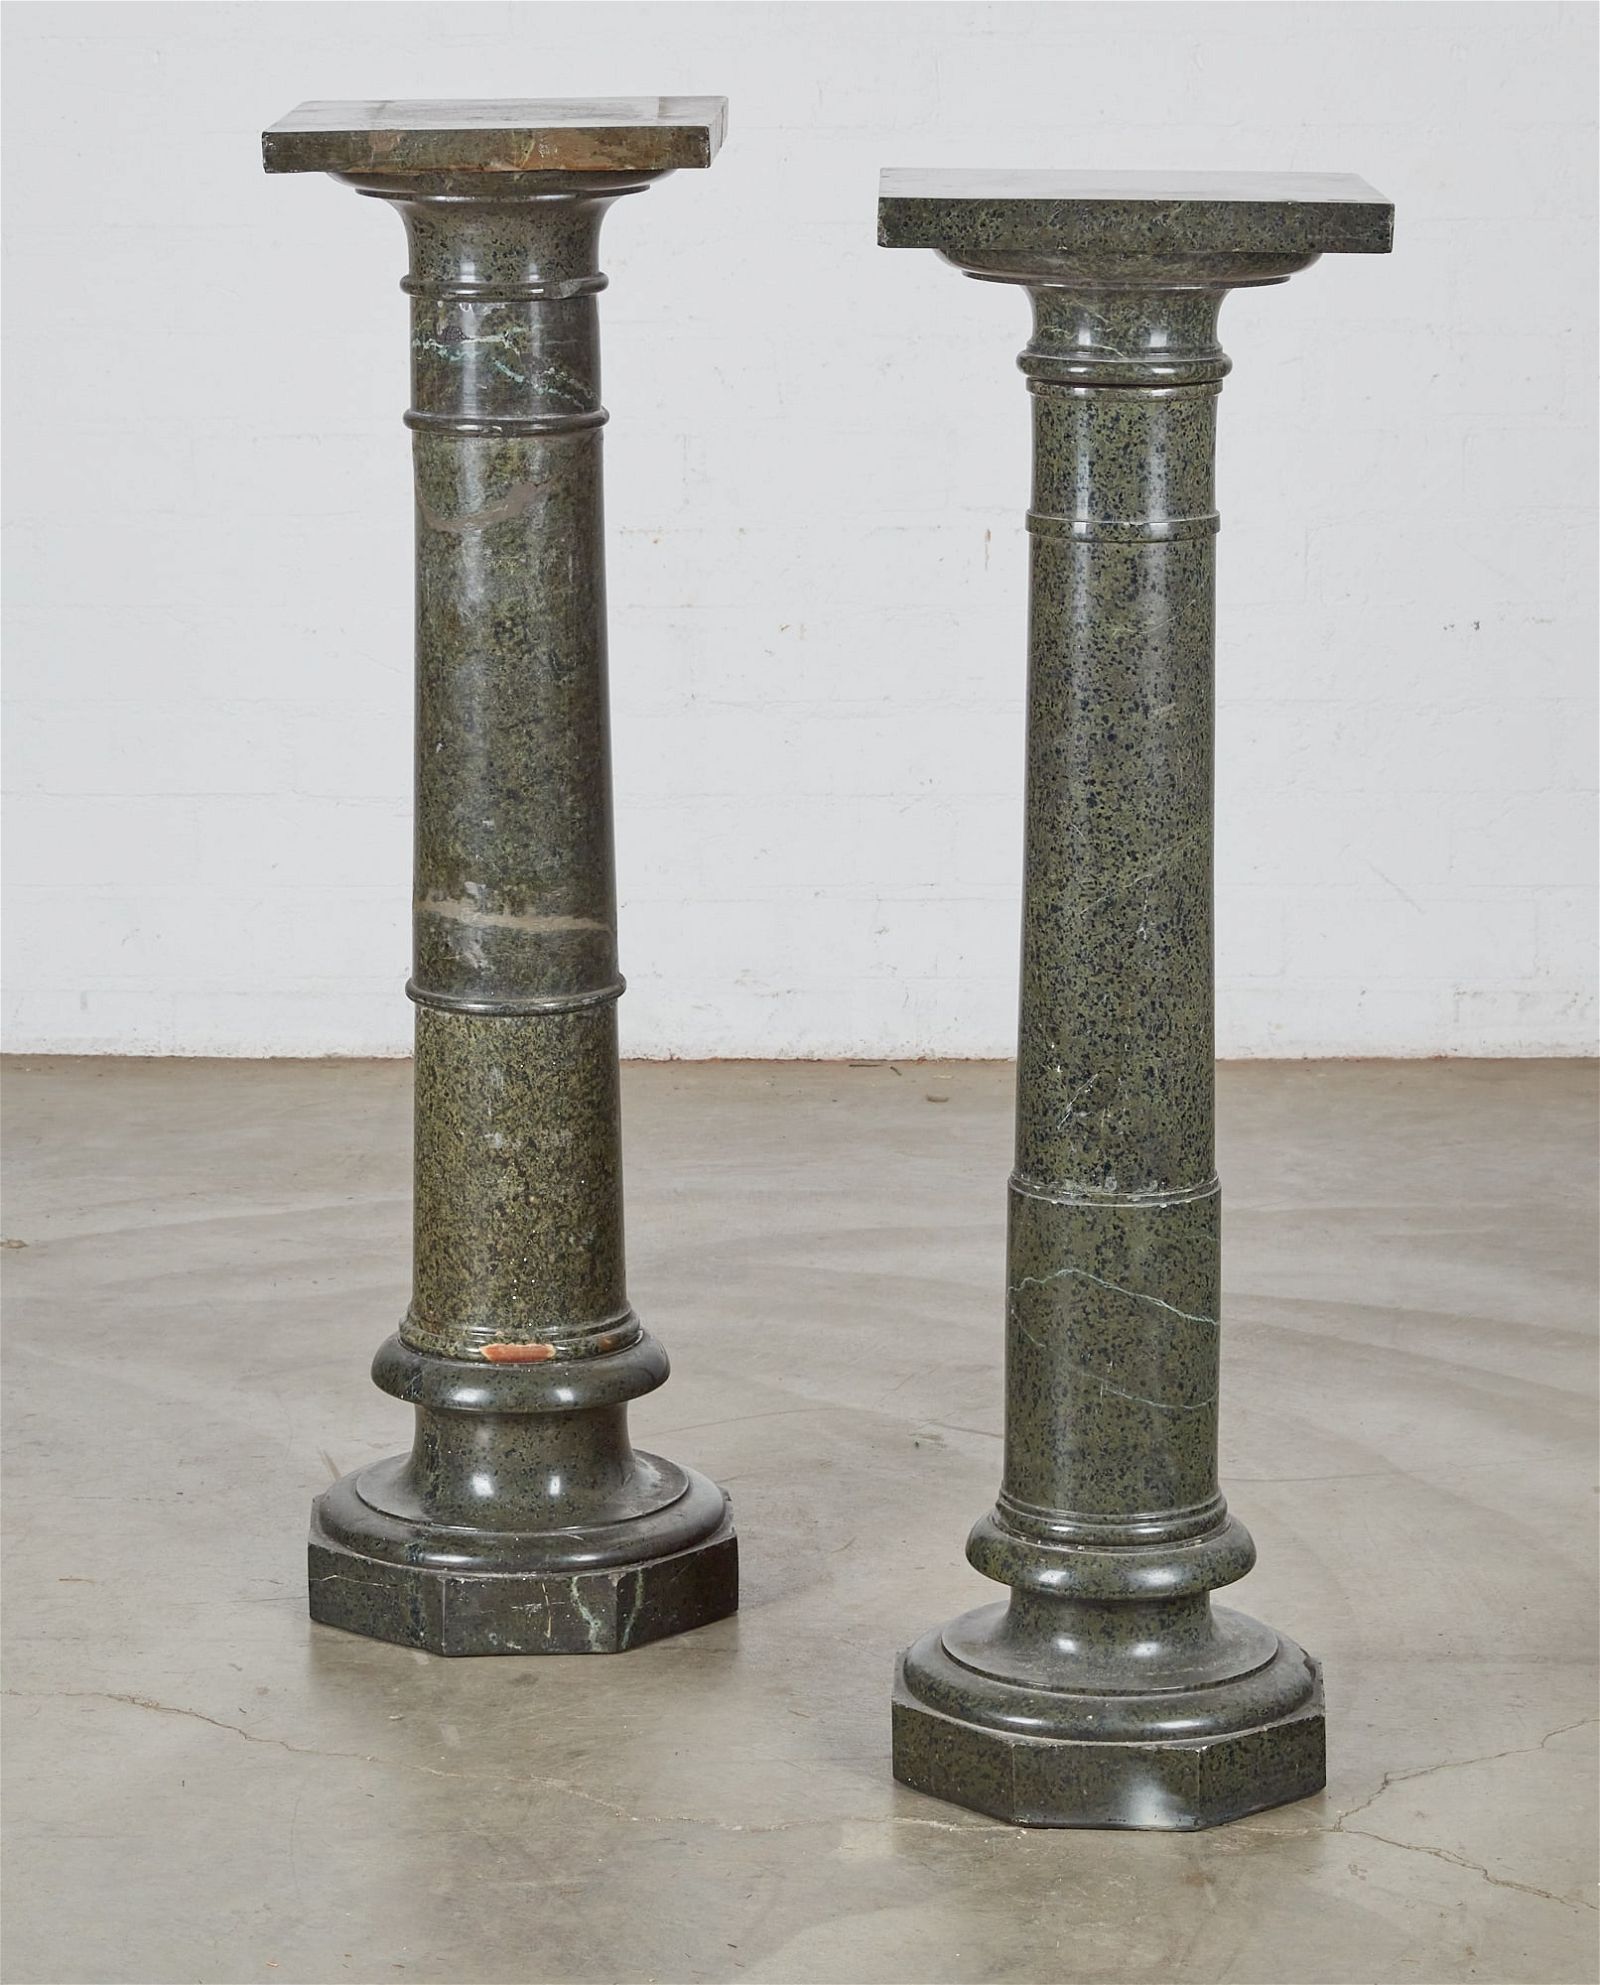 TWO SERPENTINE PEDESTALS WITH REVOLVING 2fb437b